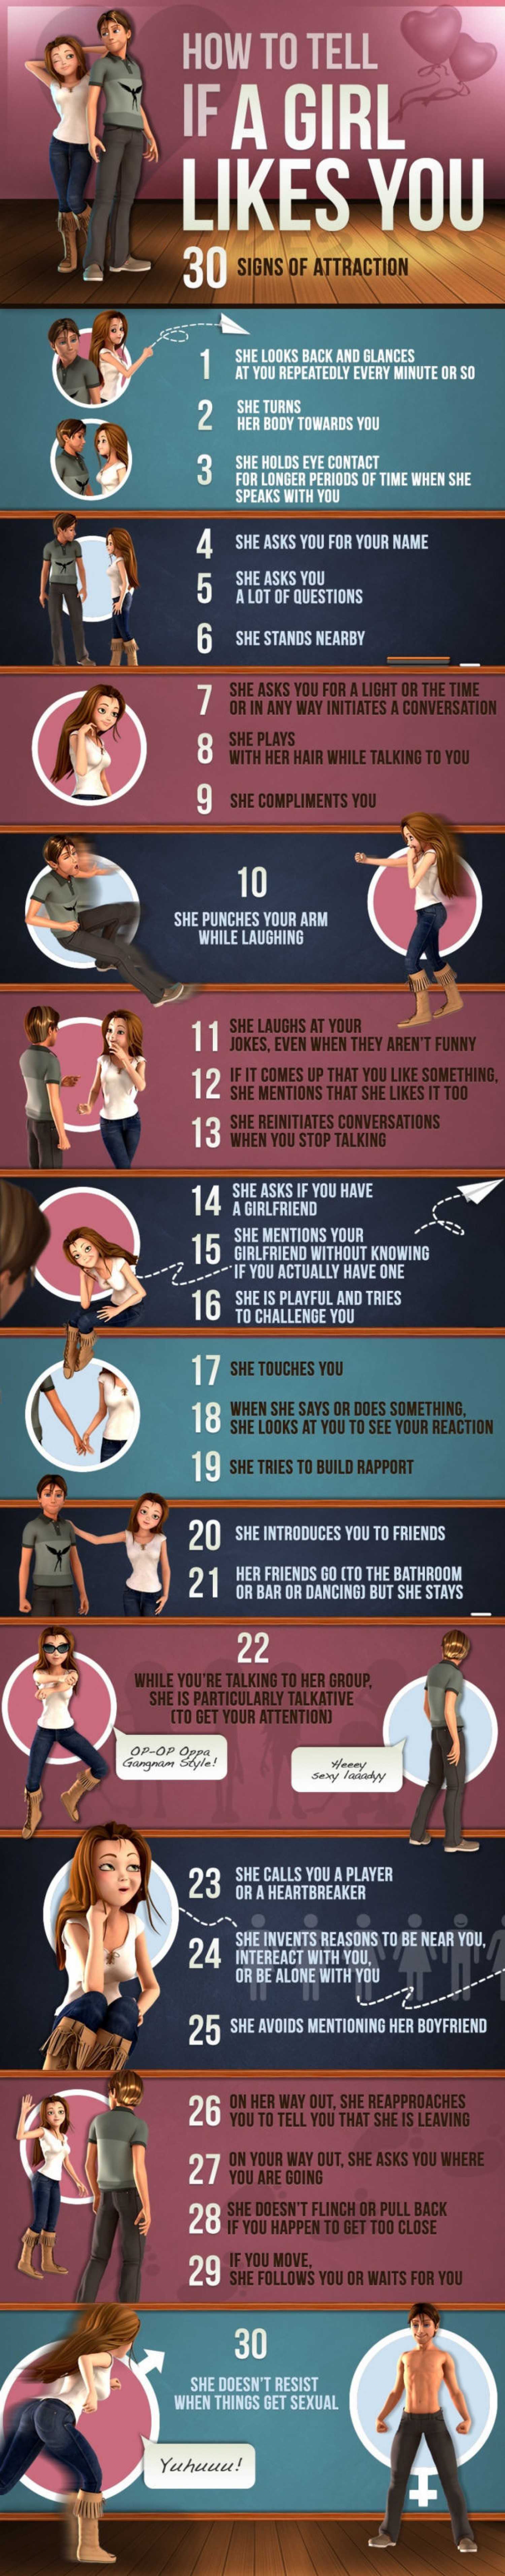 30 Signs Of Attraction